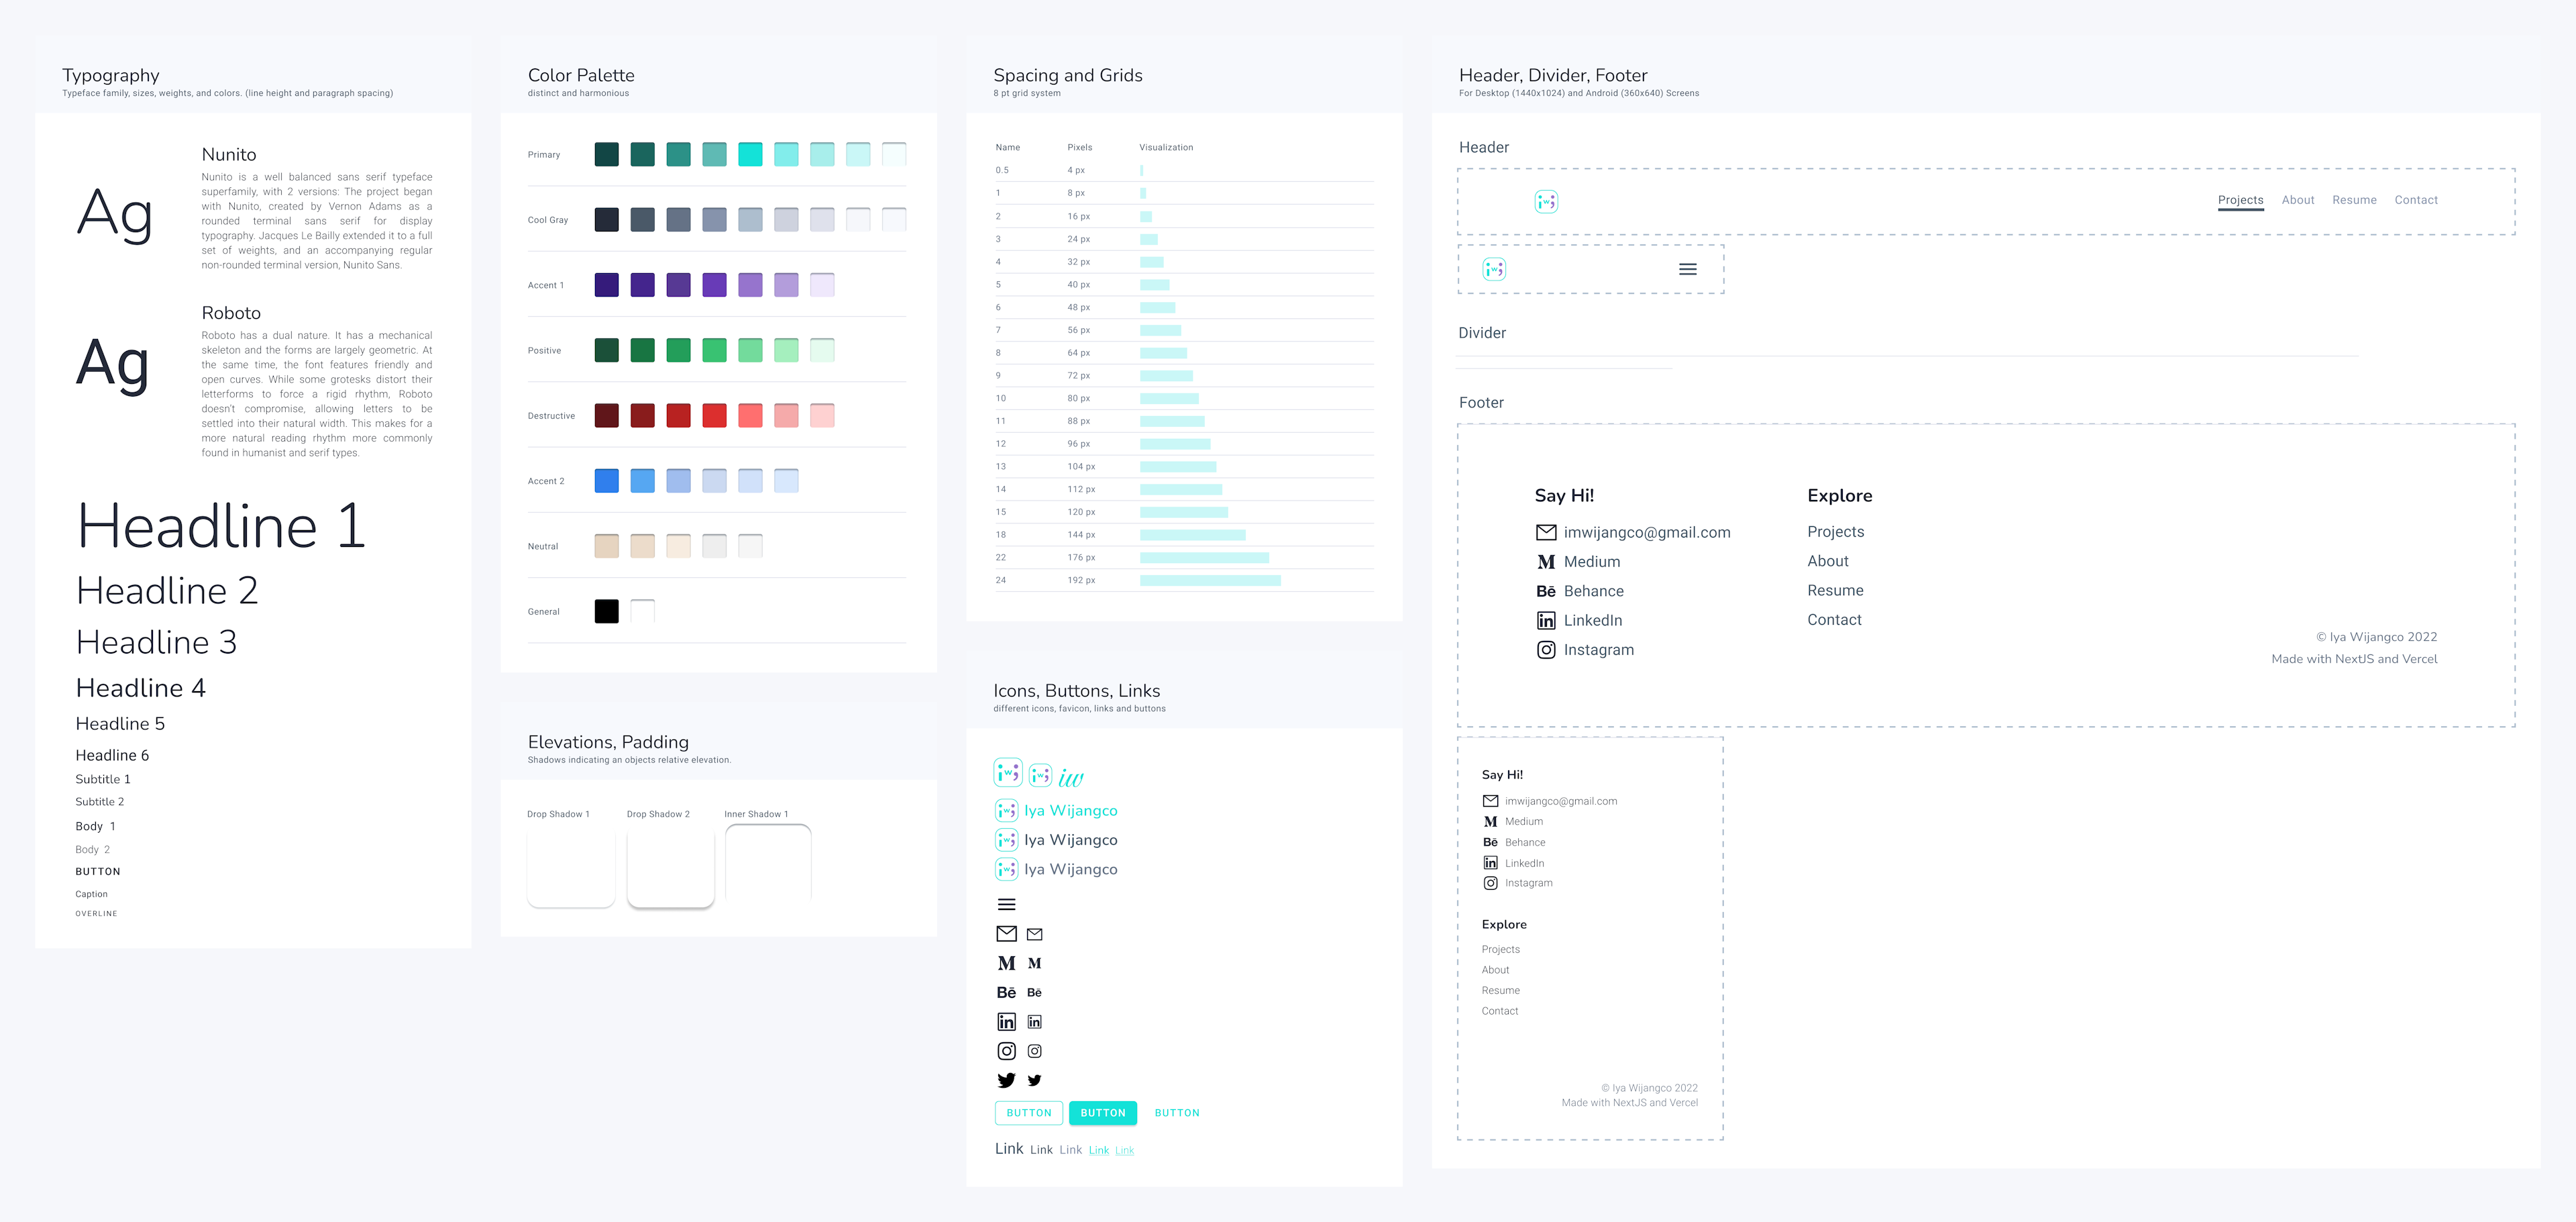 This shows the design system used in this project. The typography, colors, iconography, shadows, spacing, button variants, link variants, and other molecules are listed here.